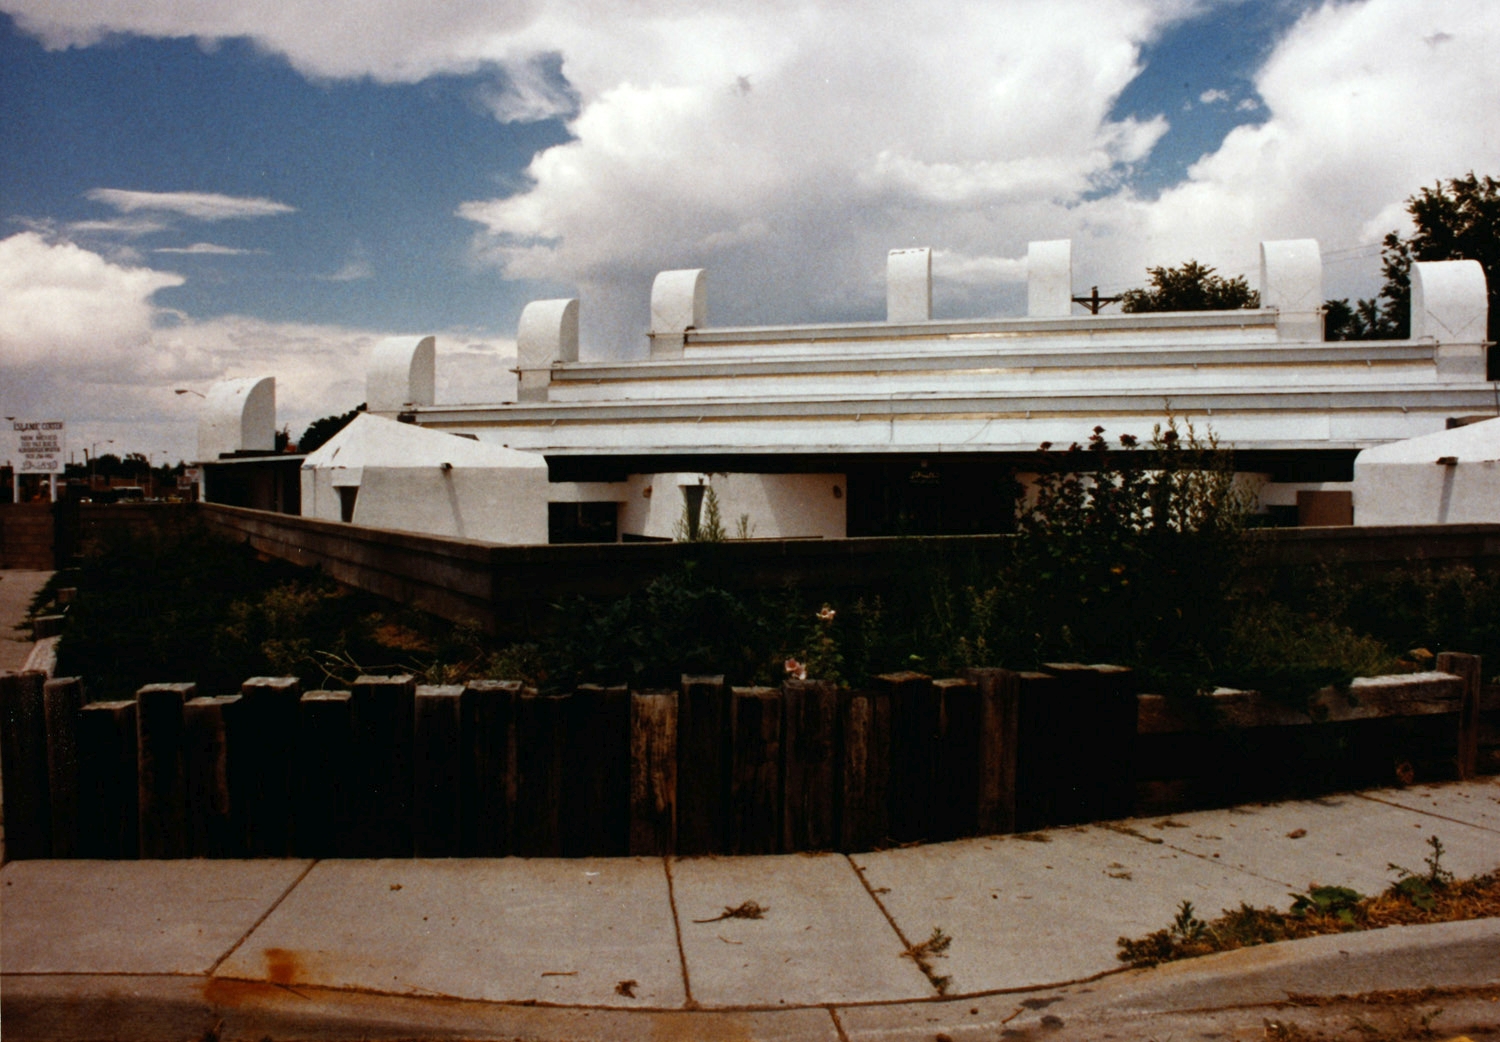 Exterior view, showing stepped roof